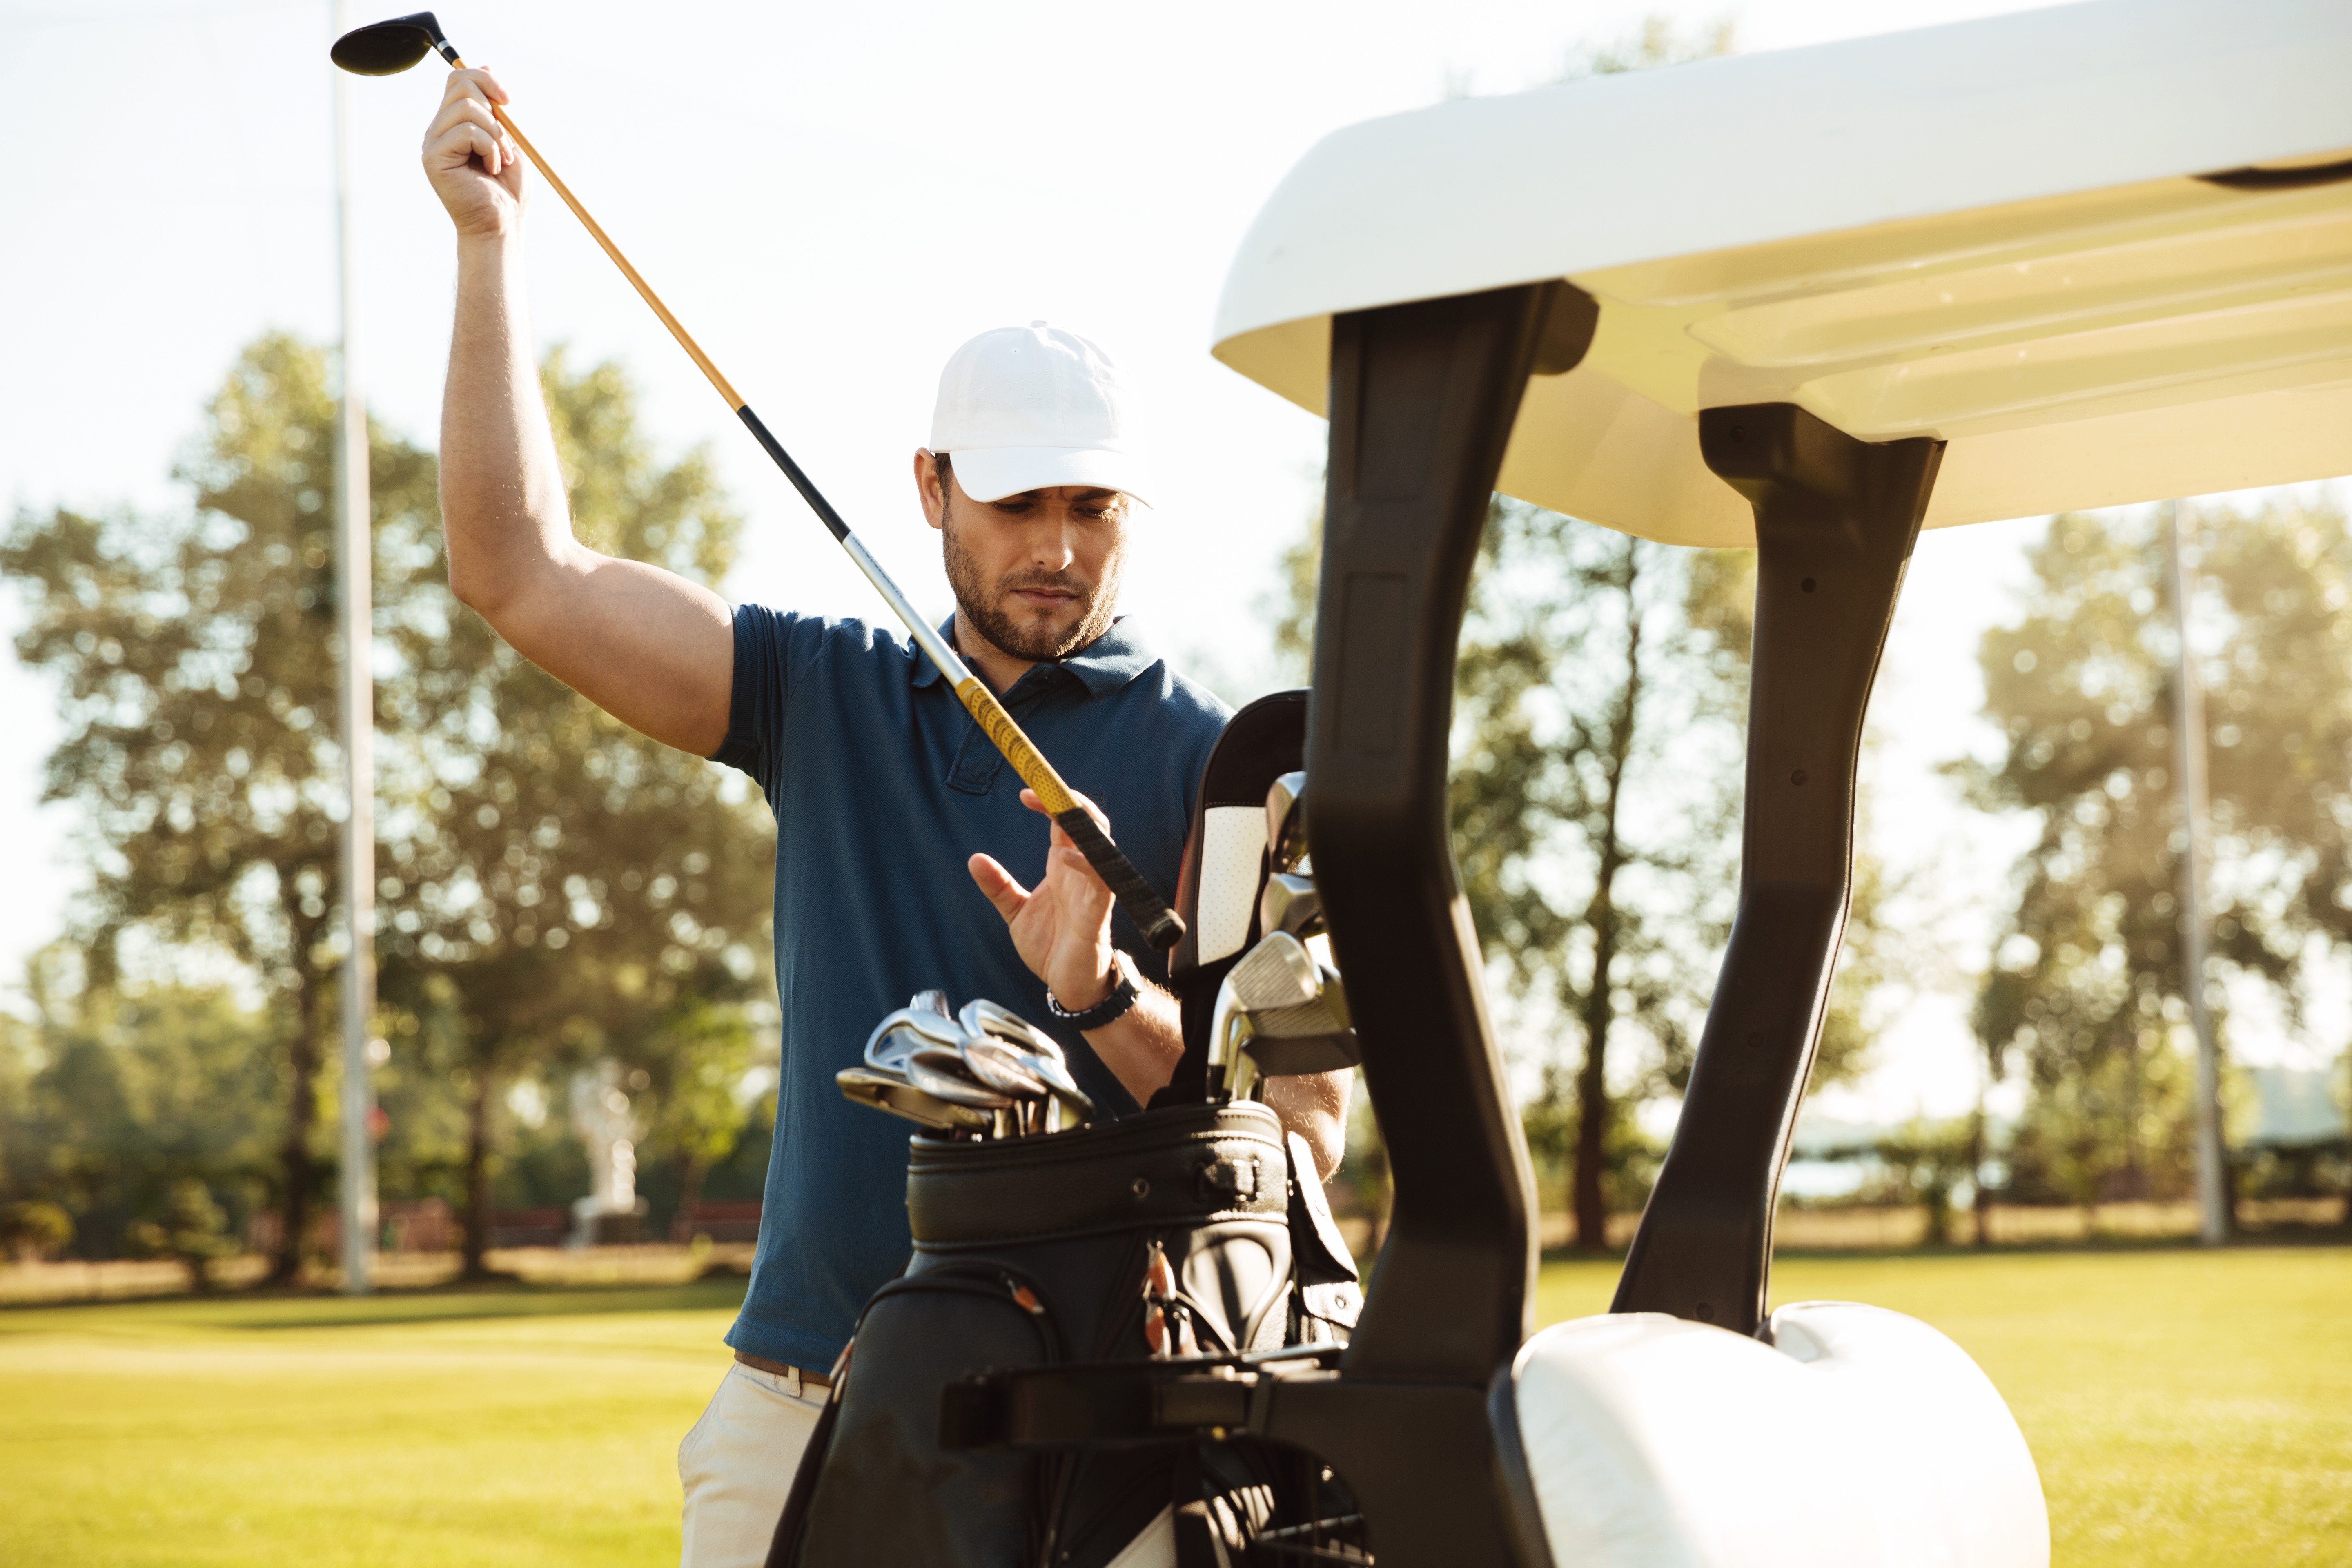 Captivate and Partners Swing Big With Golf Car Ad Opportunity